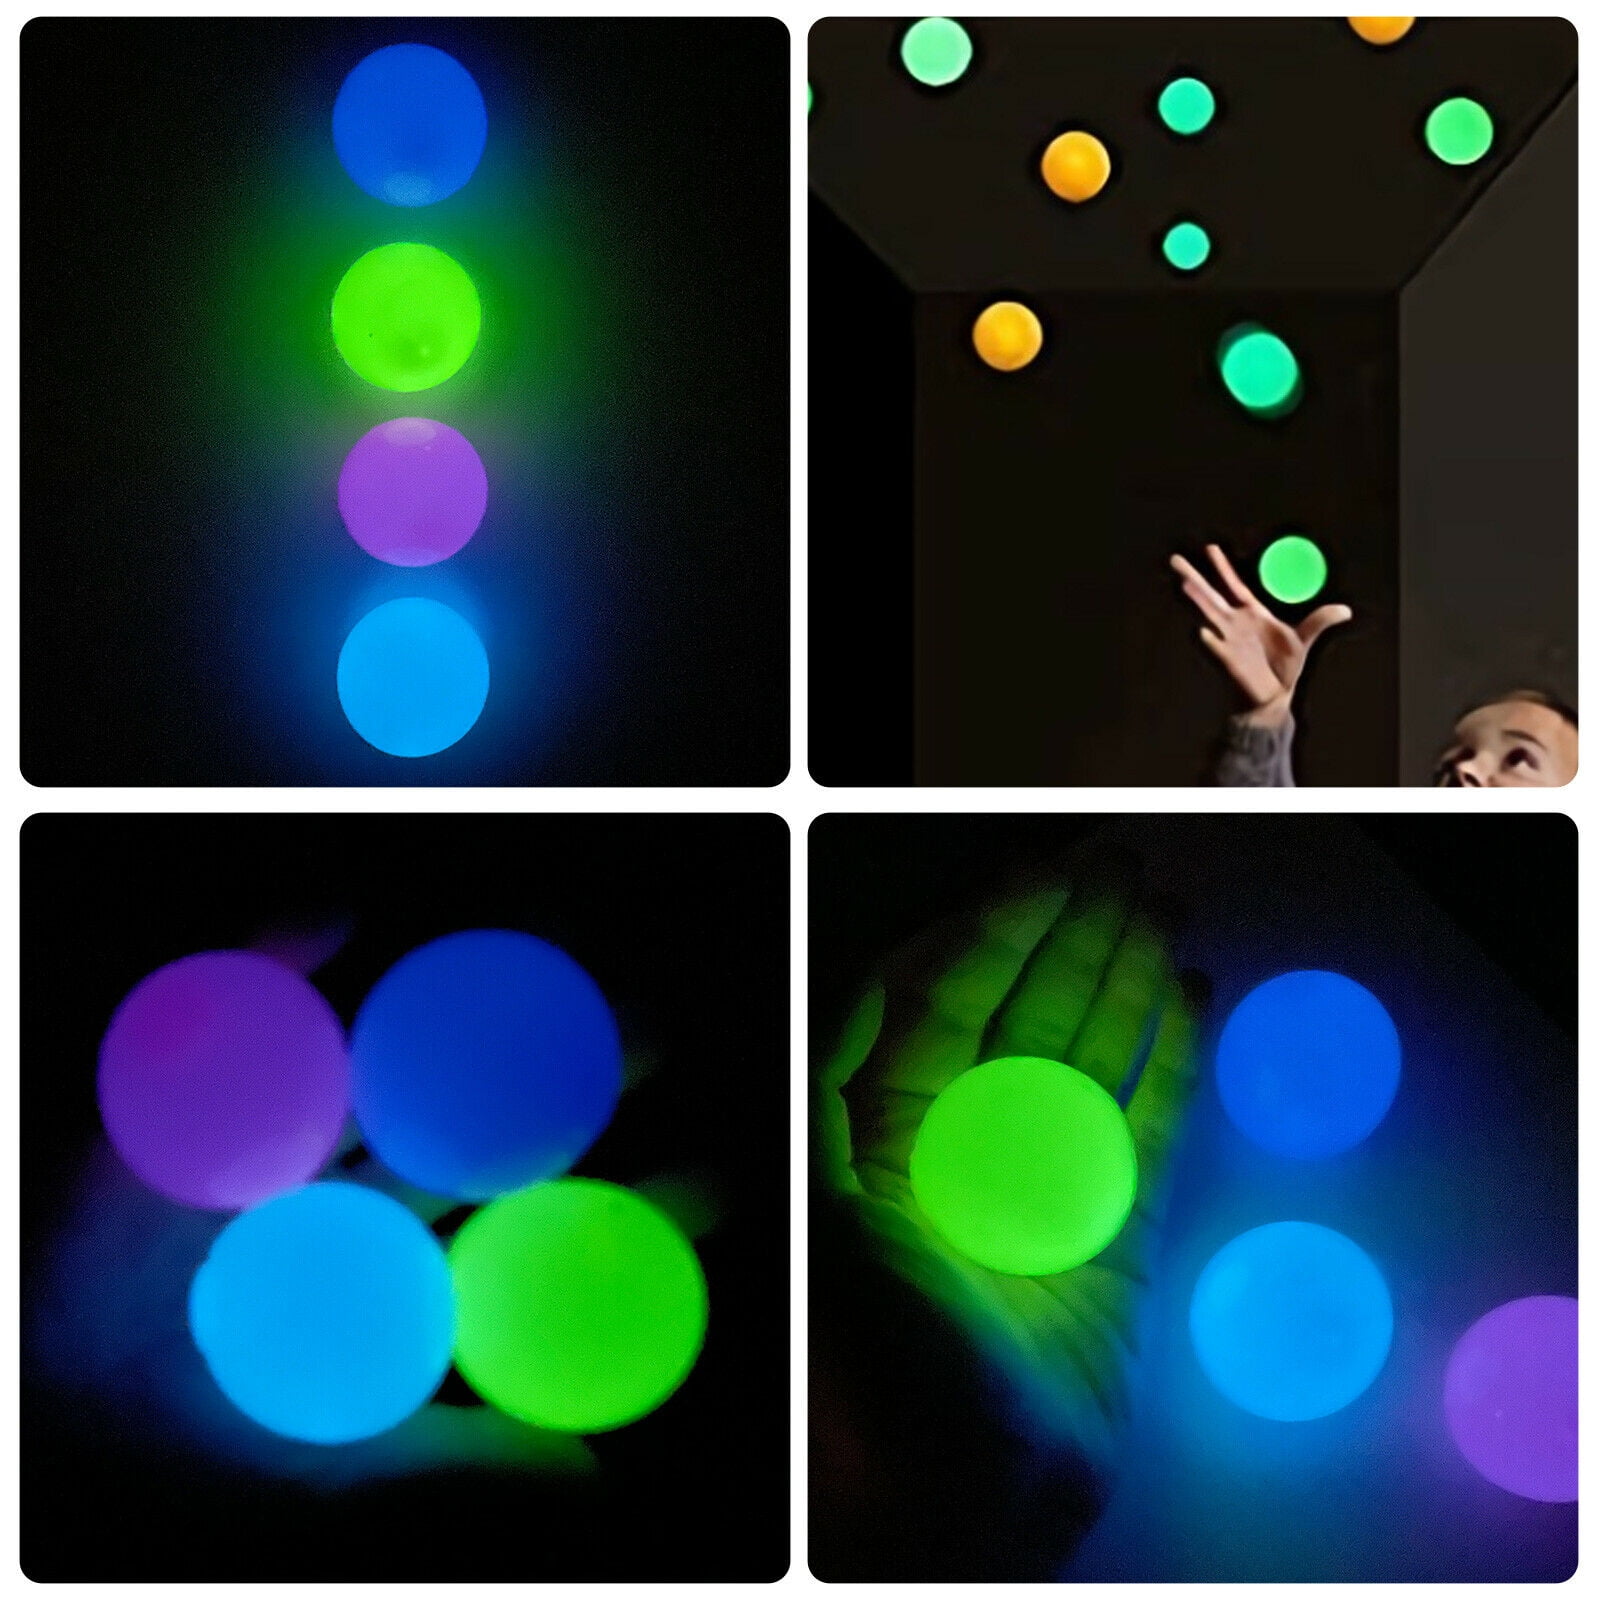 Luminous Glow In The Dark Squishy 3 Balls For Kids And Adults Stretchable,  Soft, And Anti Stress Toys For Parties And Gifting From Security11, $0.5